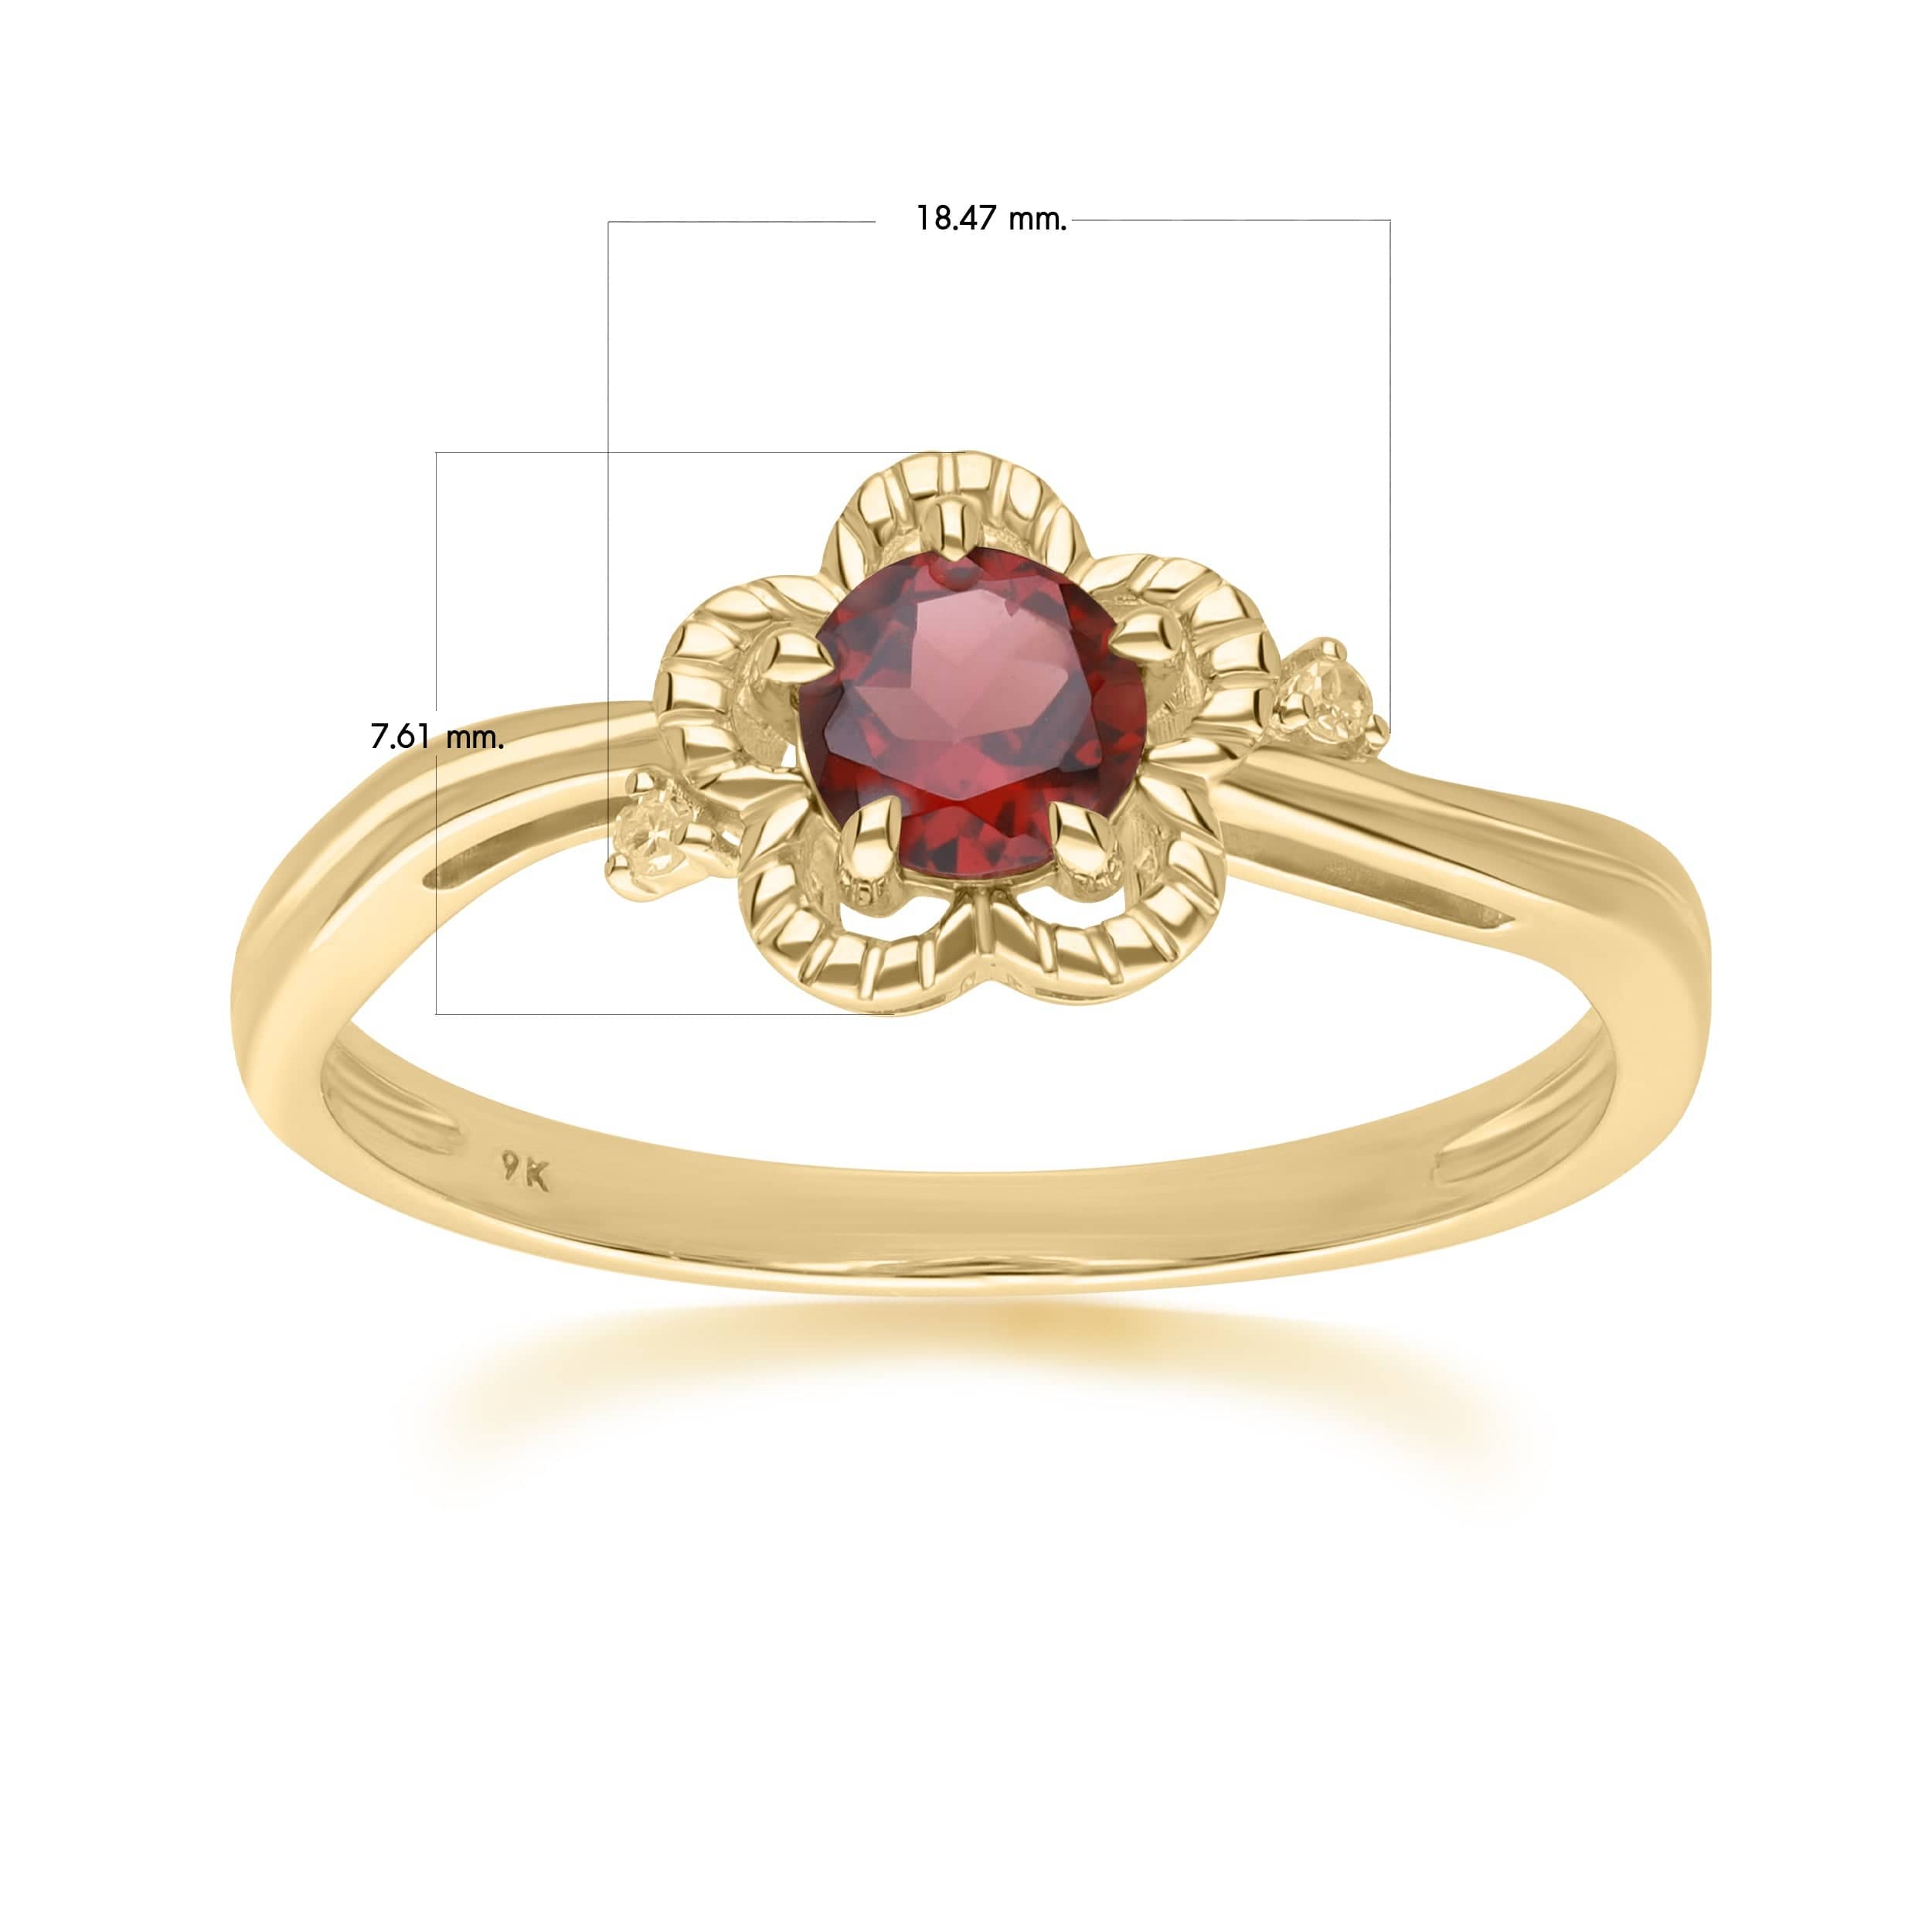 135R2049039 Floral Round Garnet & Diamond Ring in 9ct Yellow Gold 3